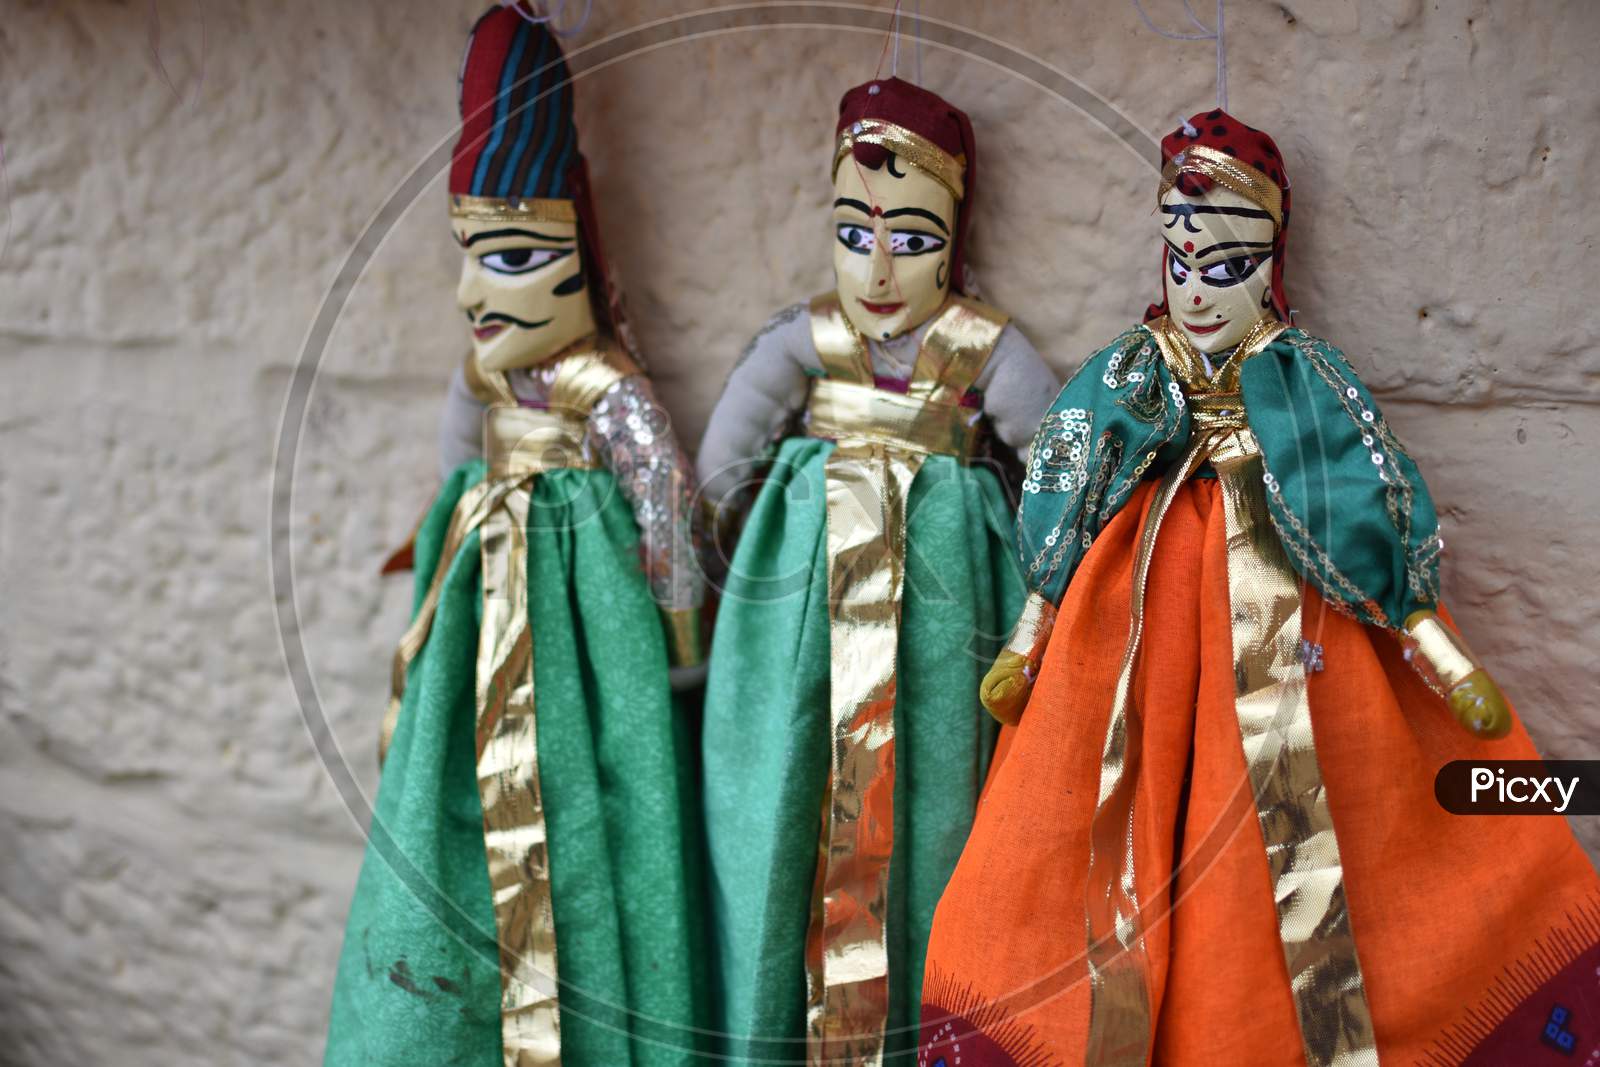 Puppet Doll Or Kathputli Is A String Puppet Theatre, Native To Rajasthan, India